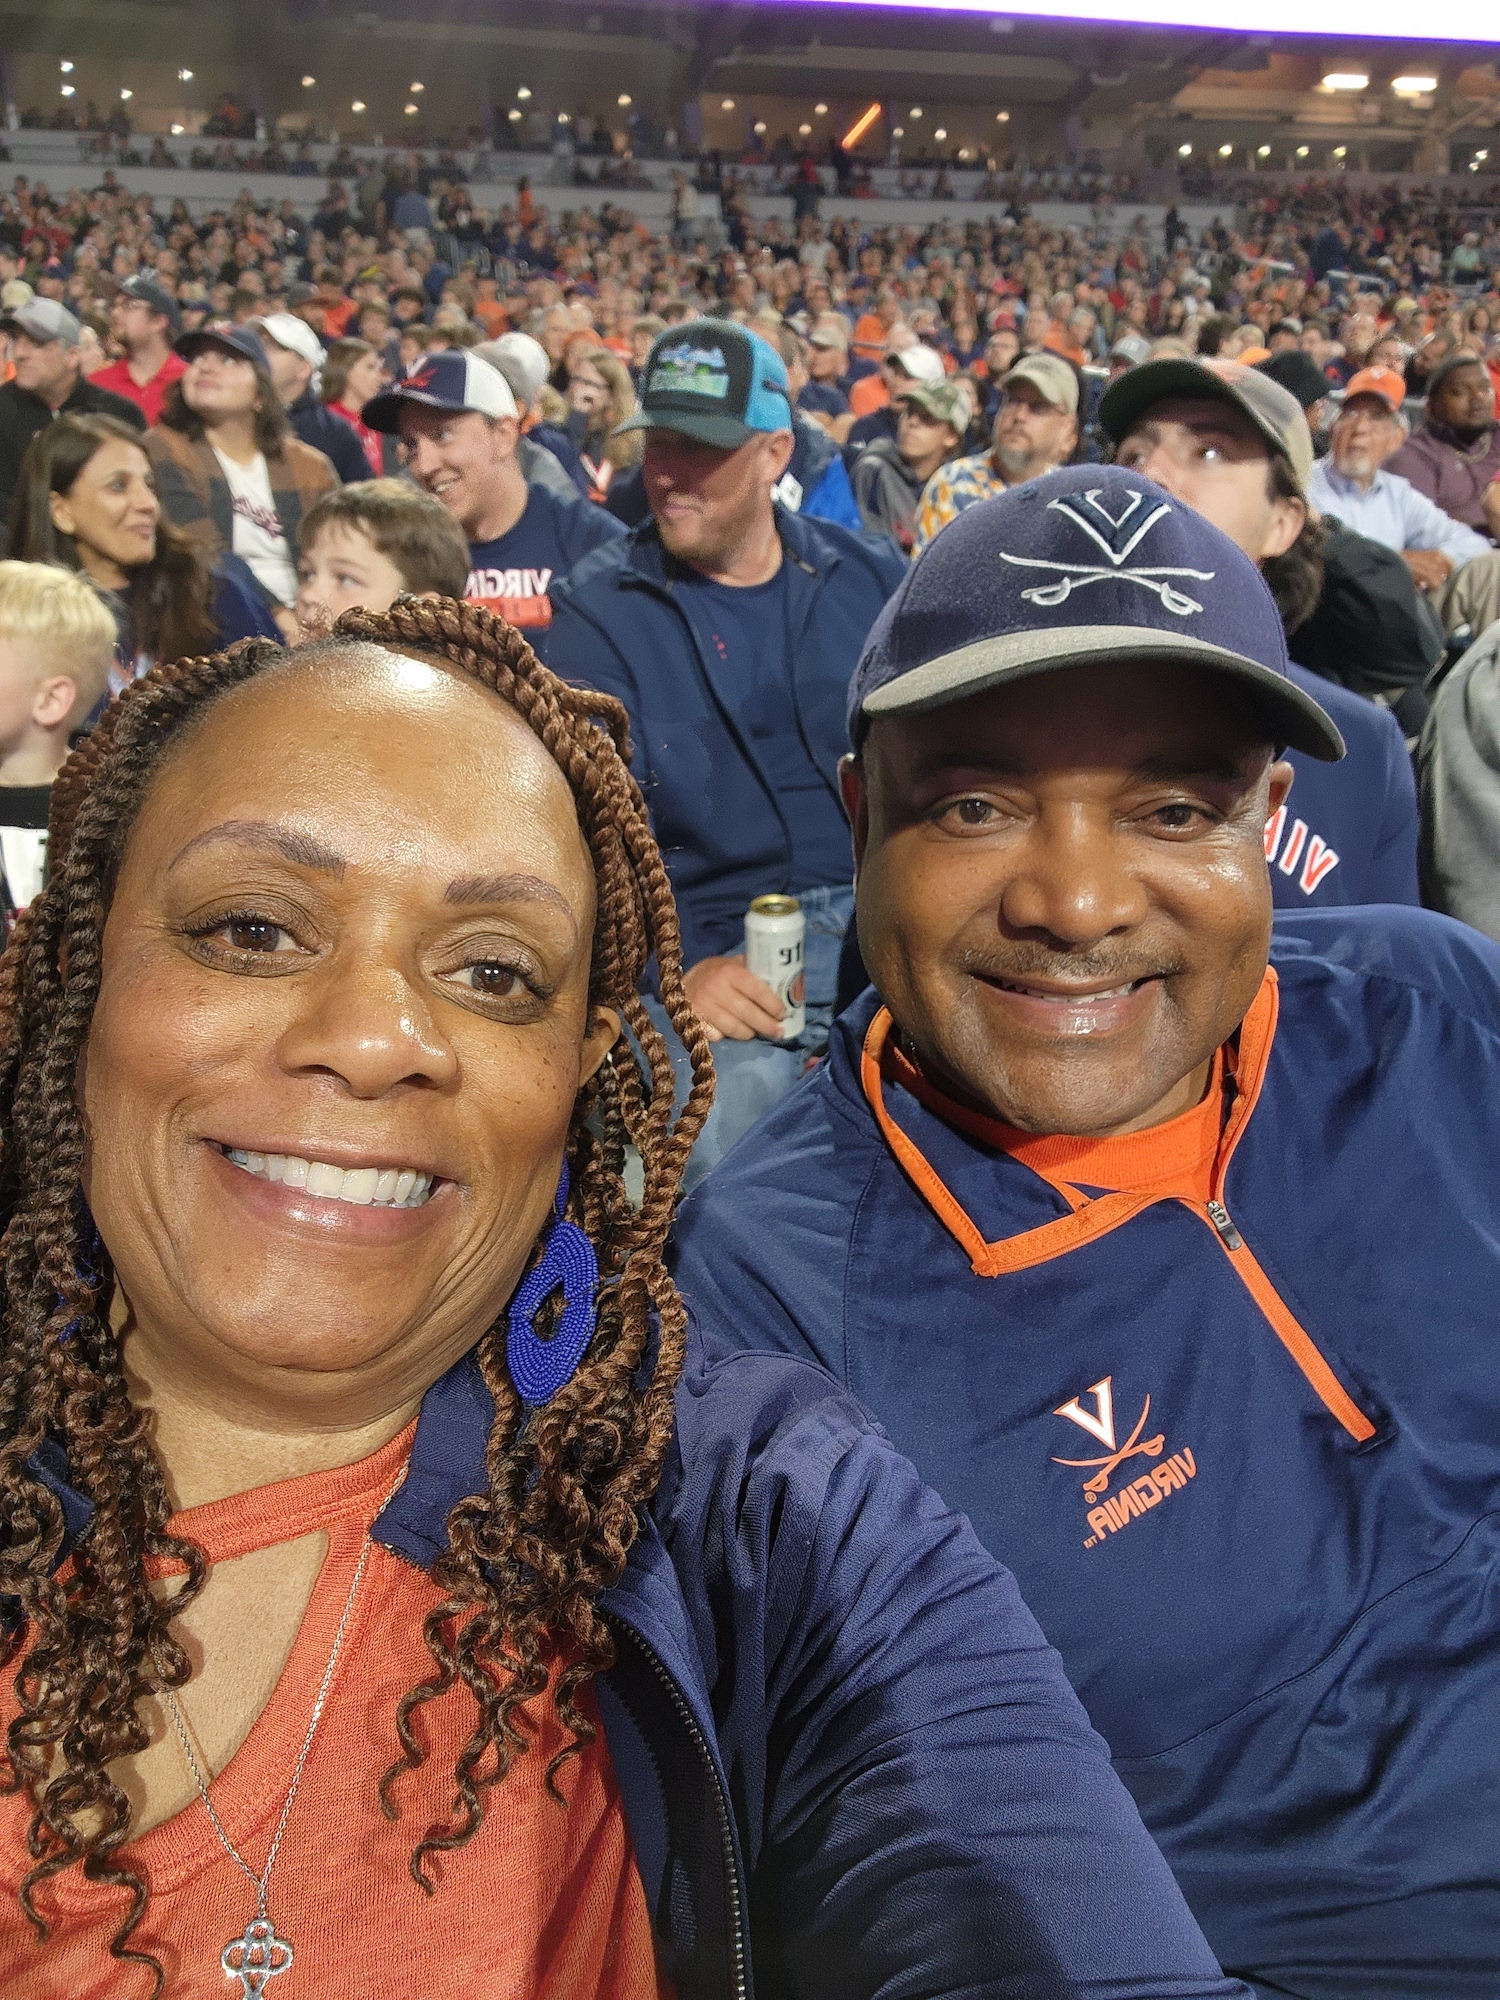 Mable and her husband at a UVA game